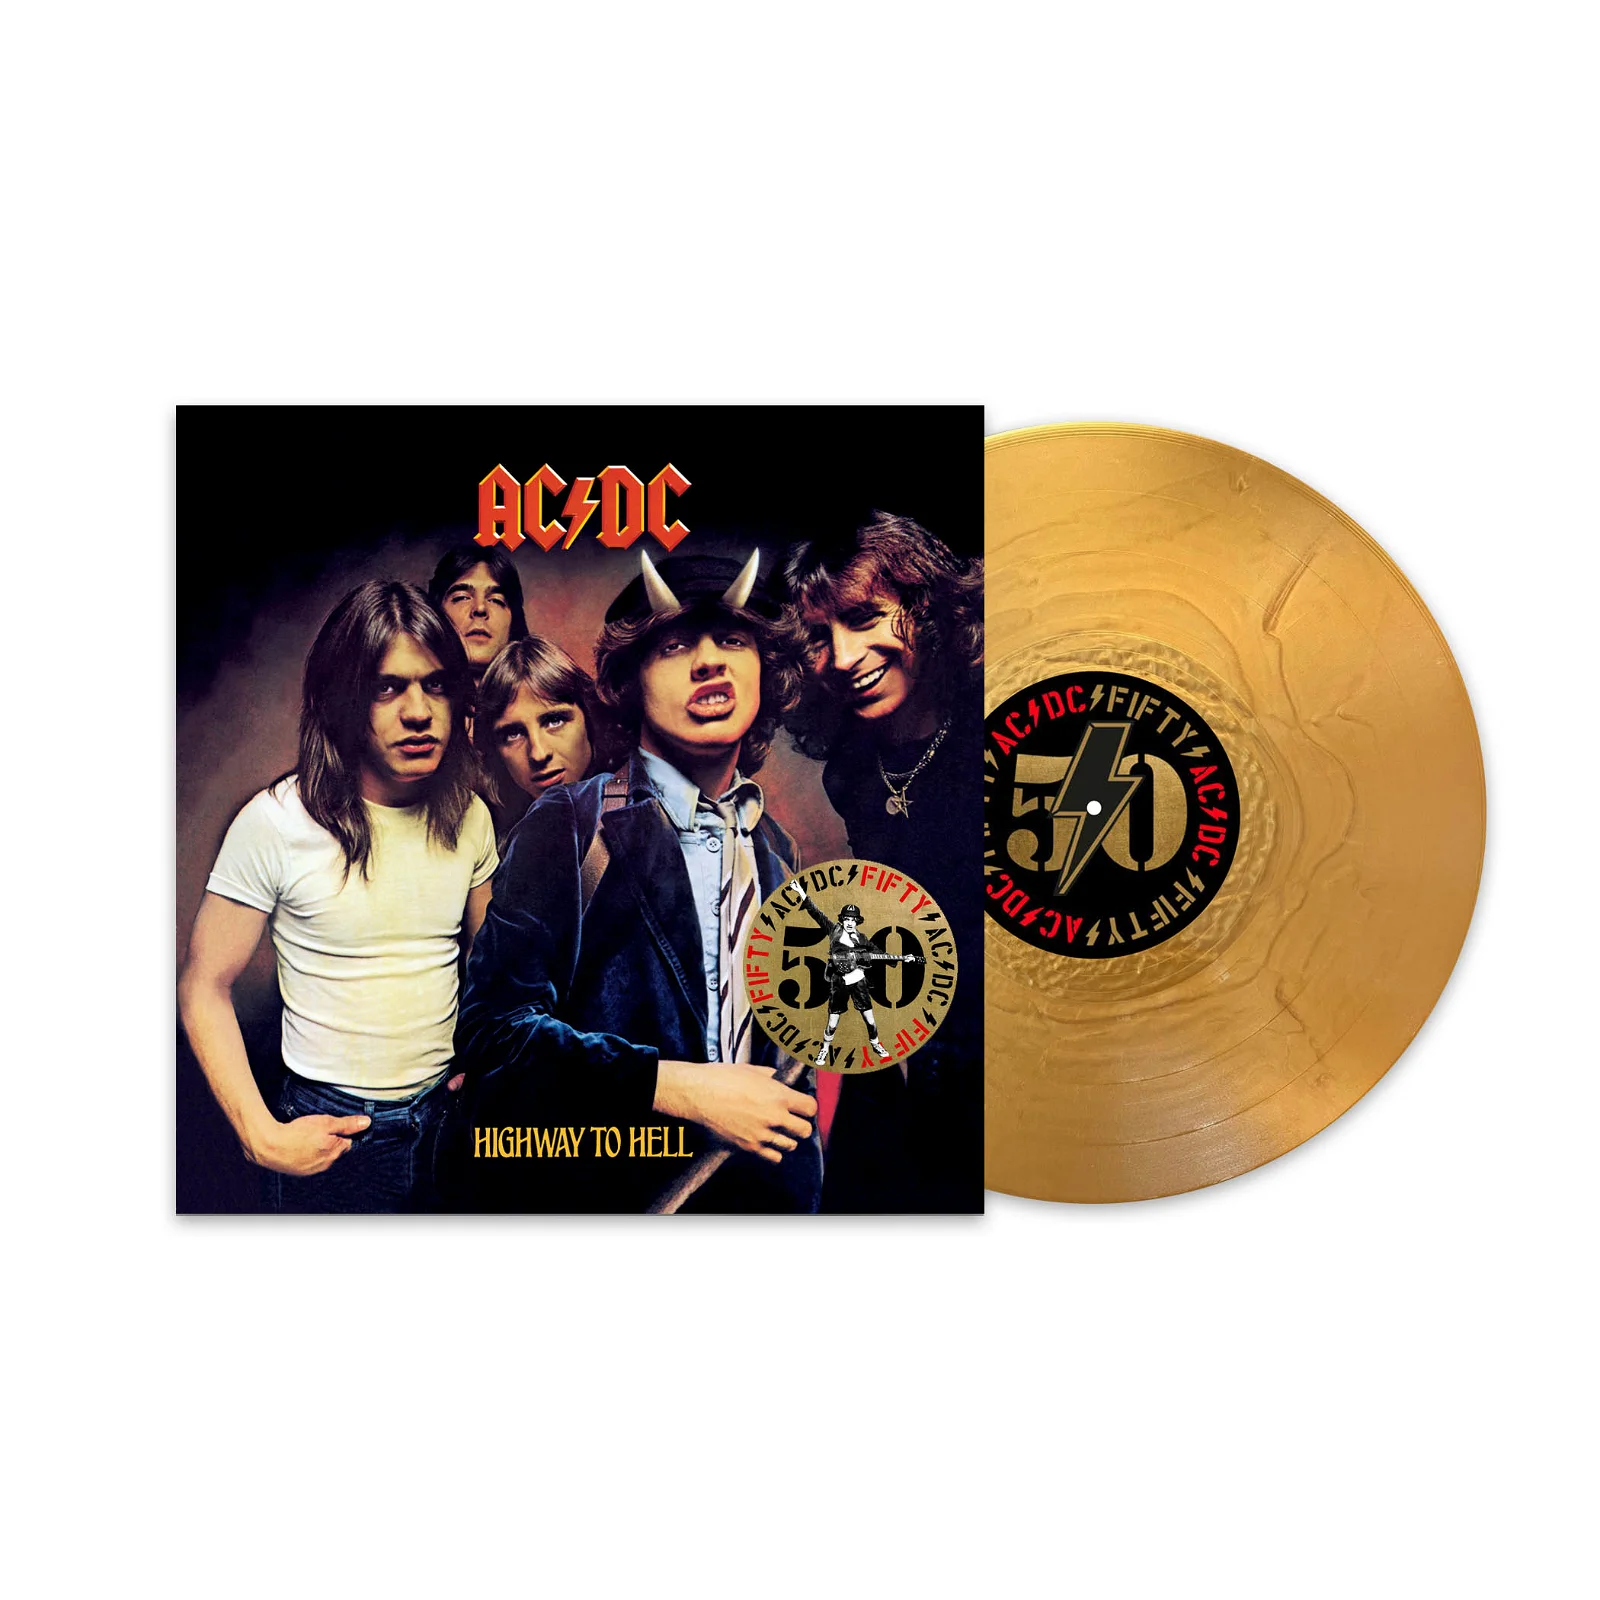 AC/DC - Highway To Hell (50th Anniversary Gold Vinyl) (Highway To Hell (50th Anniversary Gold Vinyl))